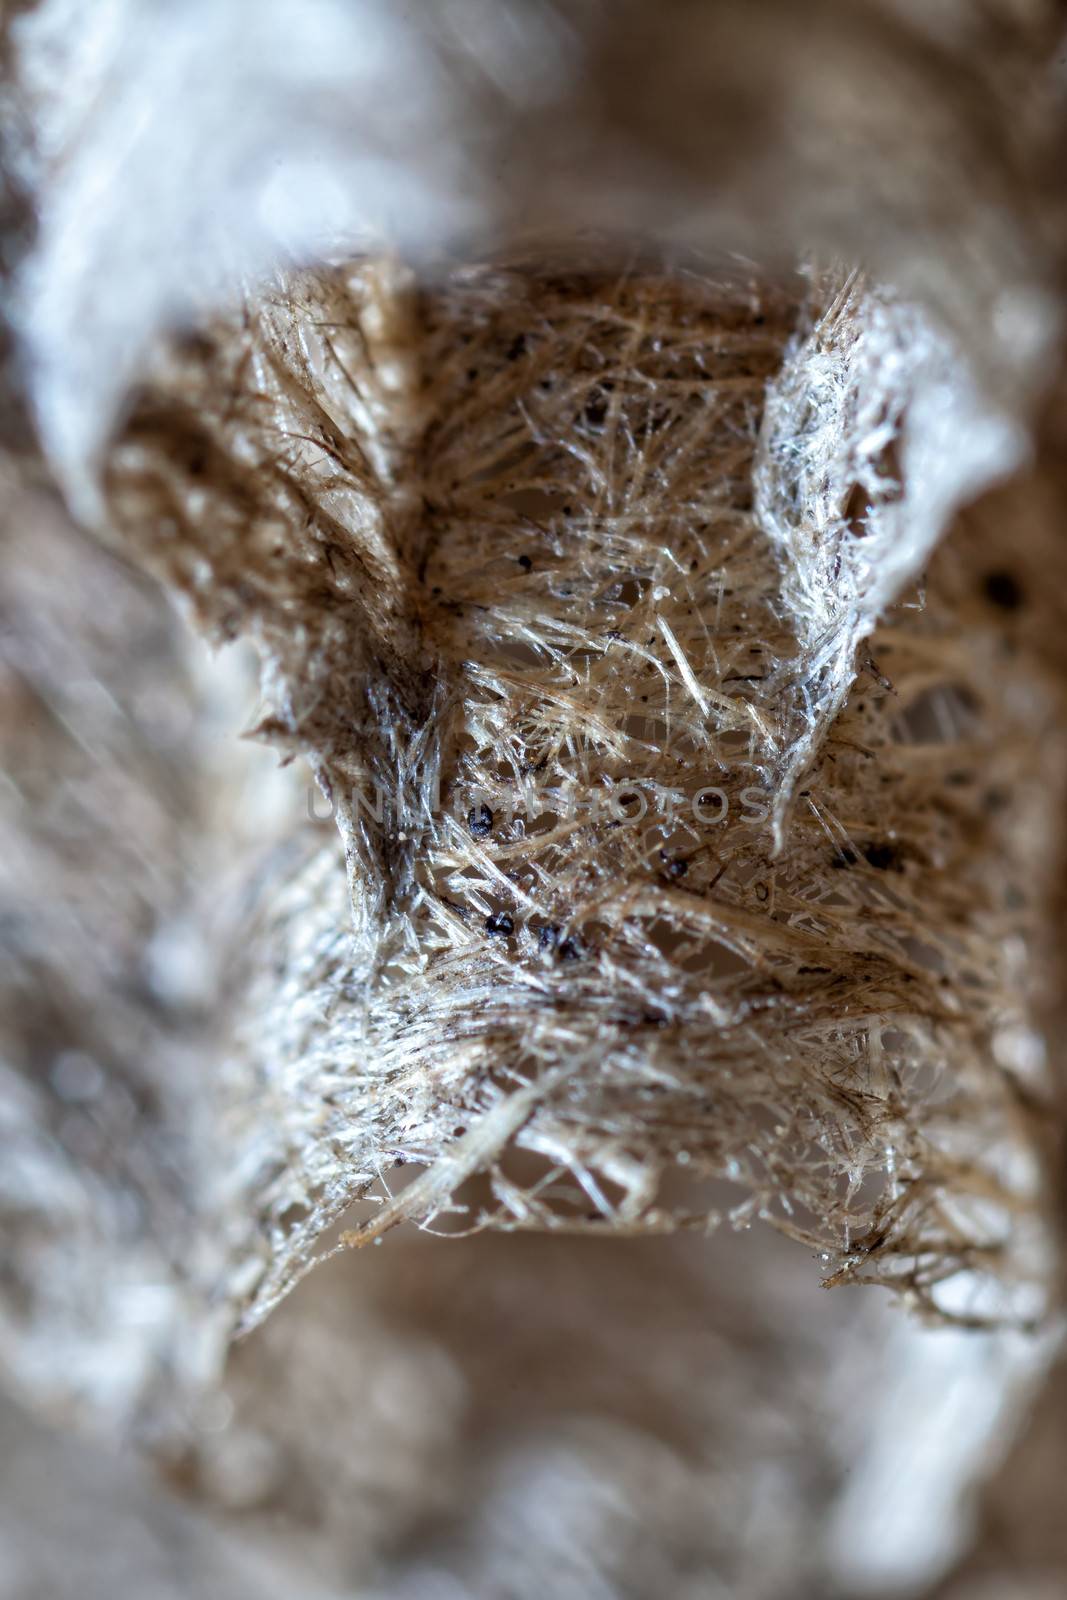 4 times lifesize detail shot of a new nest belonging to a young Paper Wasp Queen, constructed by mixing pieces of stem and leaves with saliva.